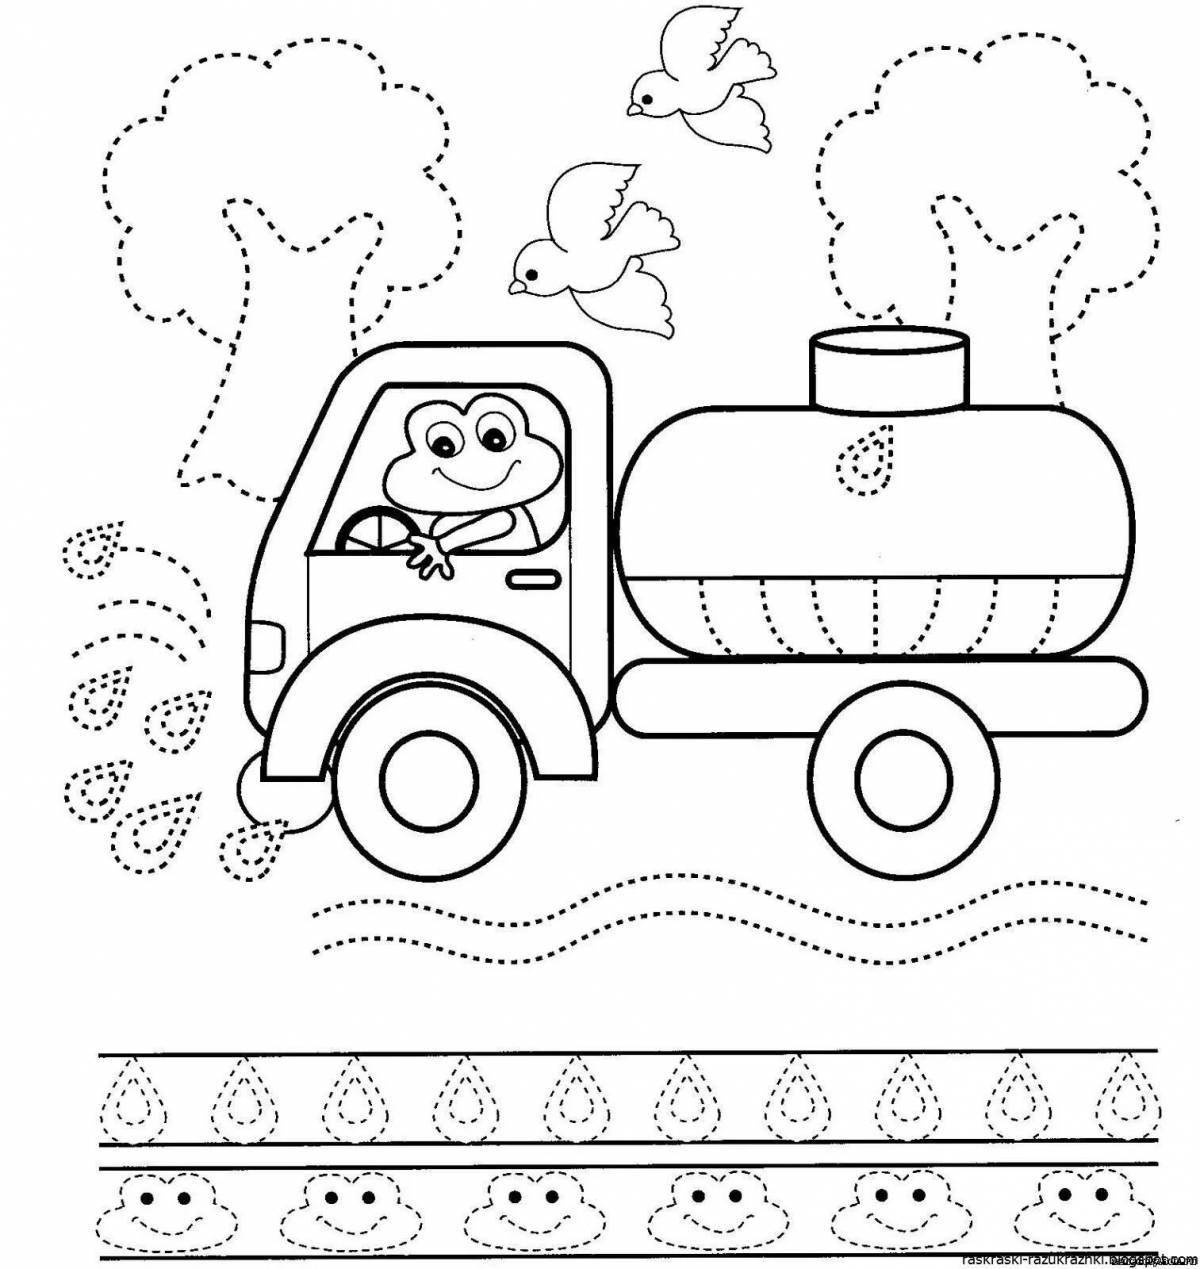 Coloring game adorable cars for boys 4 years old